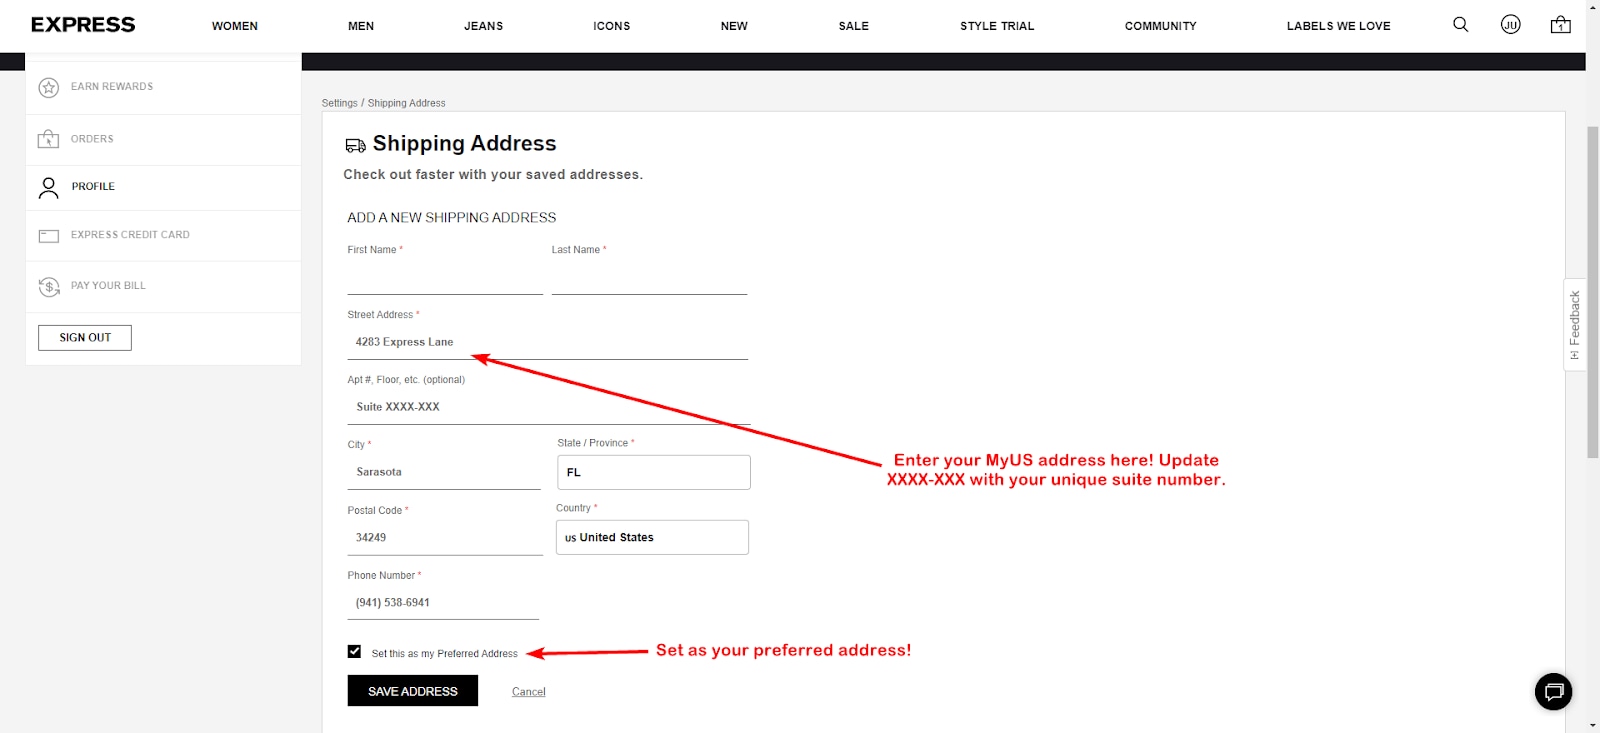 Add Your MyUS Address to Express Account Checkout